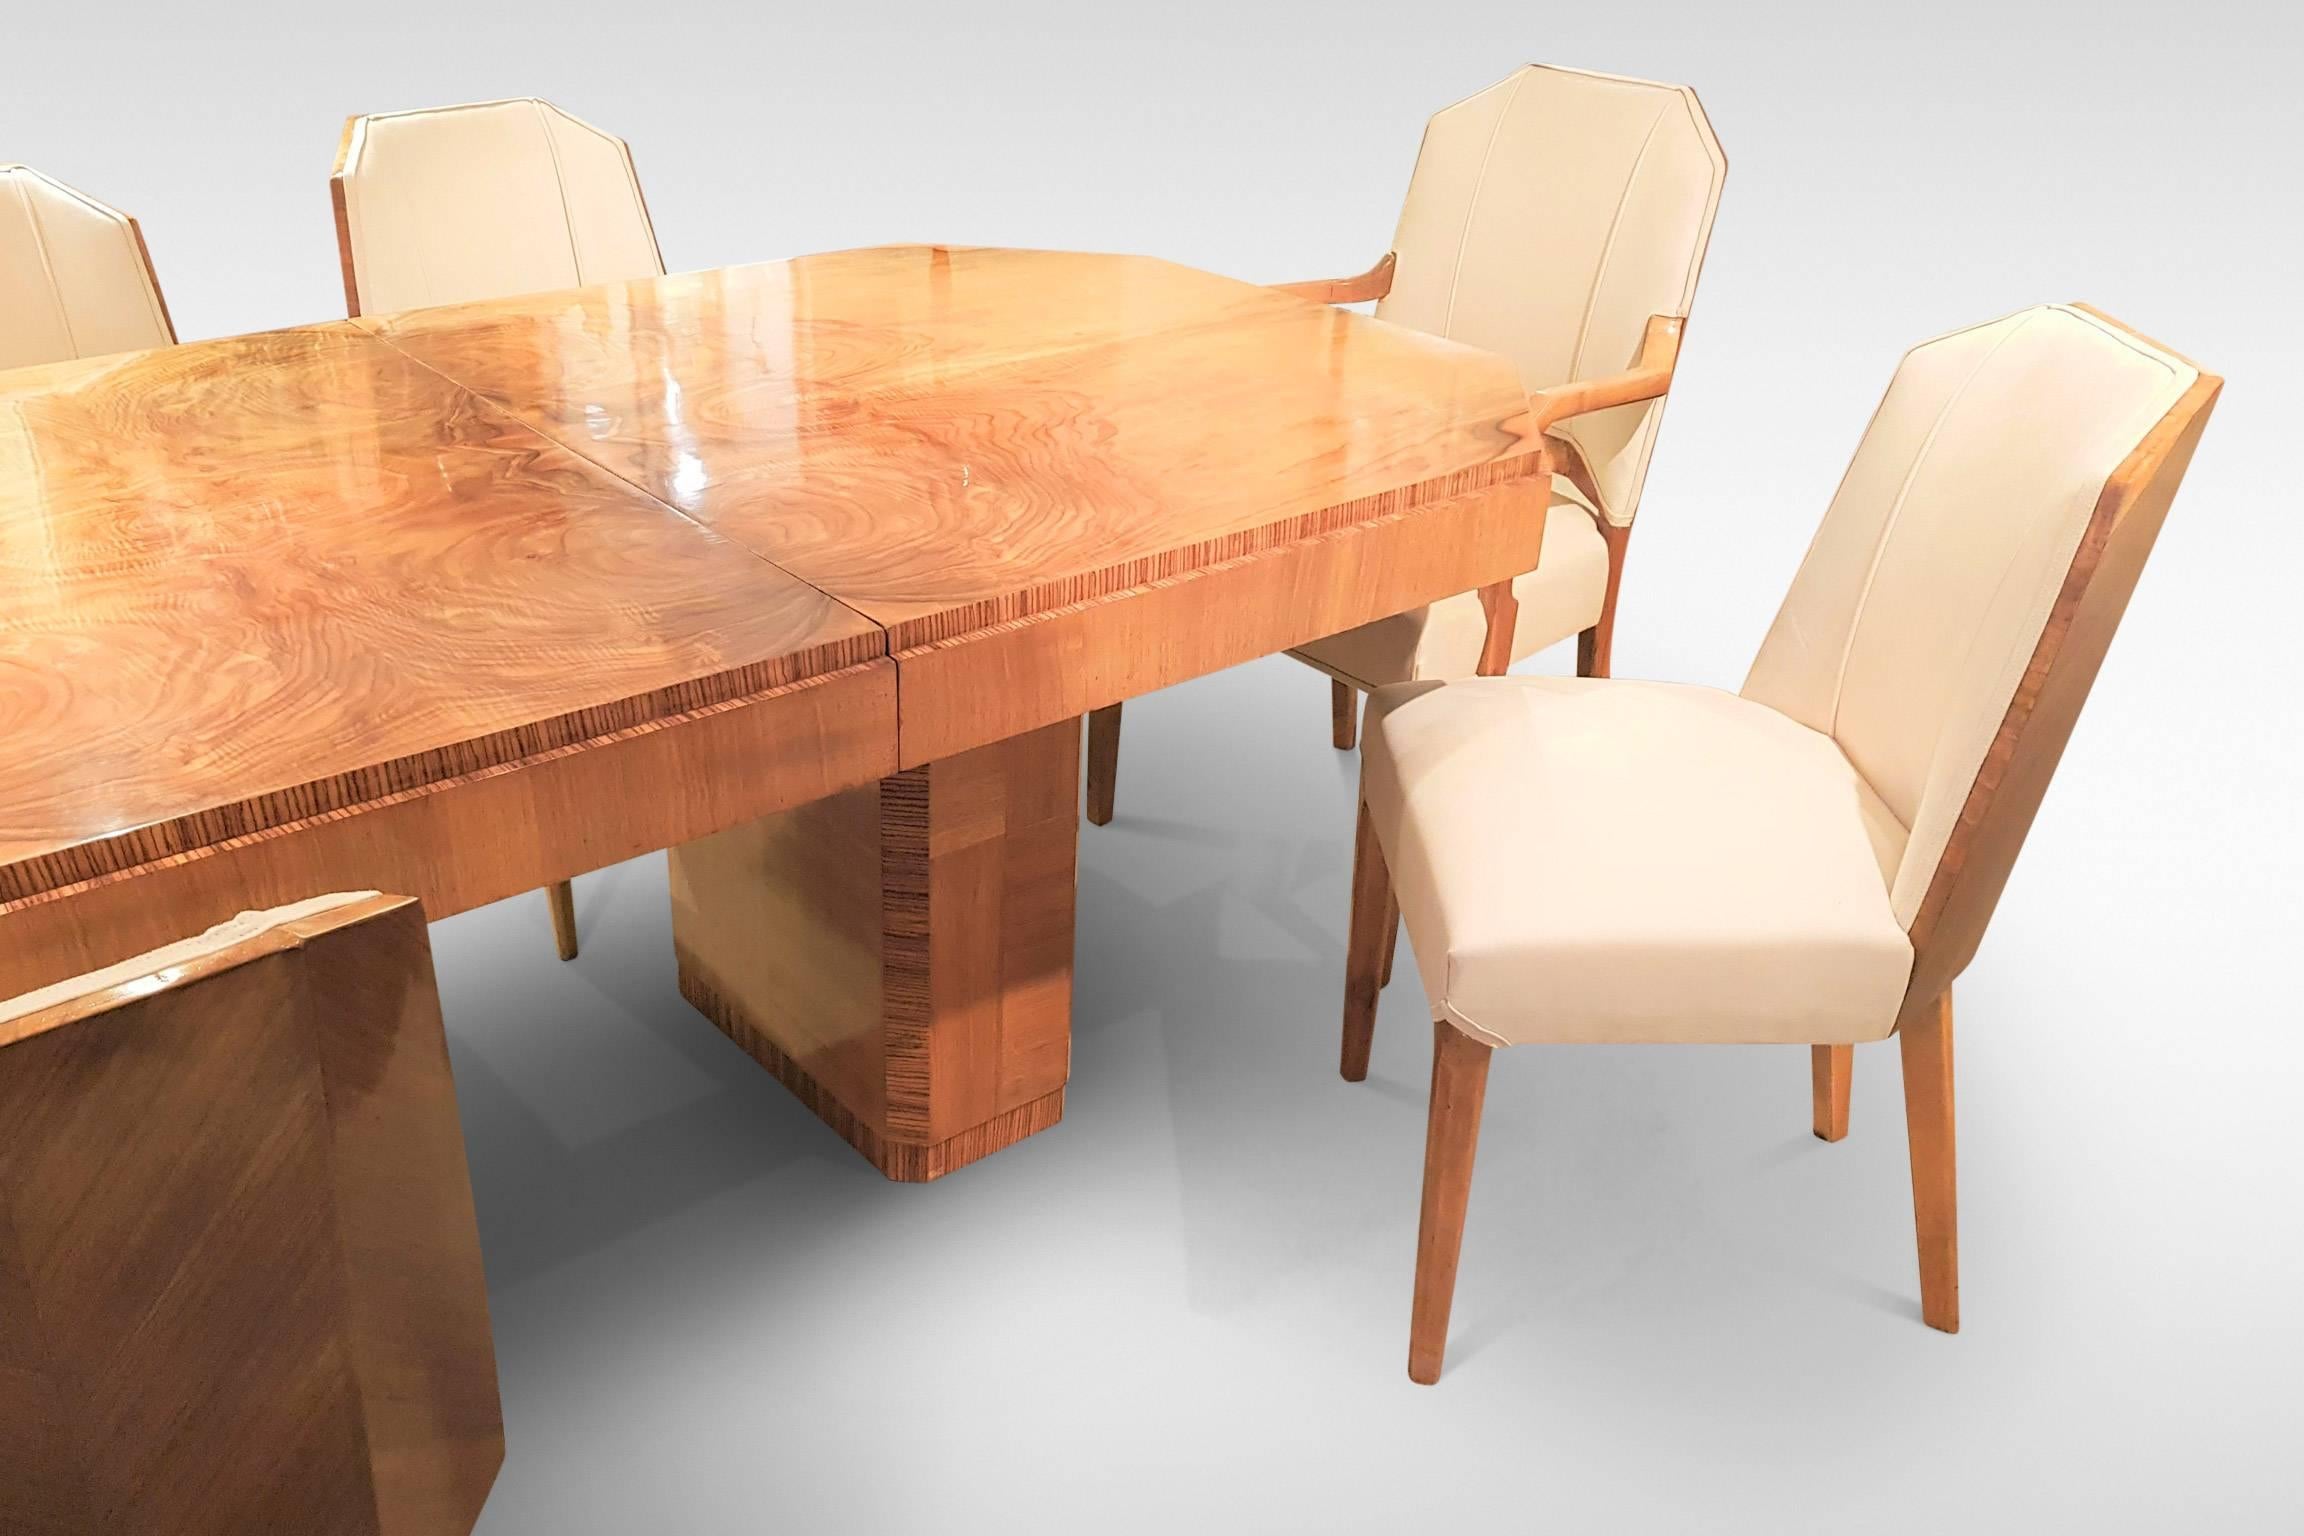 This is a stunning example of fine quality British geometric Art Deco furniture. Attributed to Hille, the matched set comprises a rare extending eight-seat pedestal dining table with six geometric dining chairs and two carver armchairs in a related